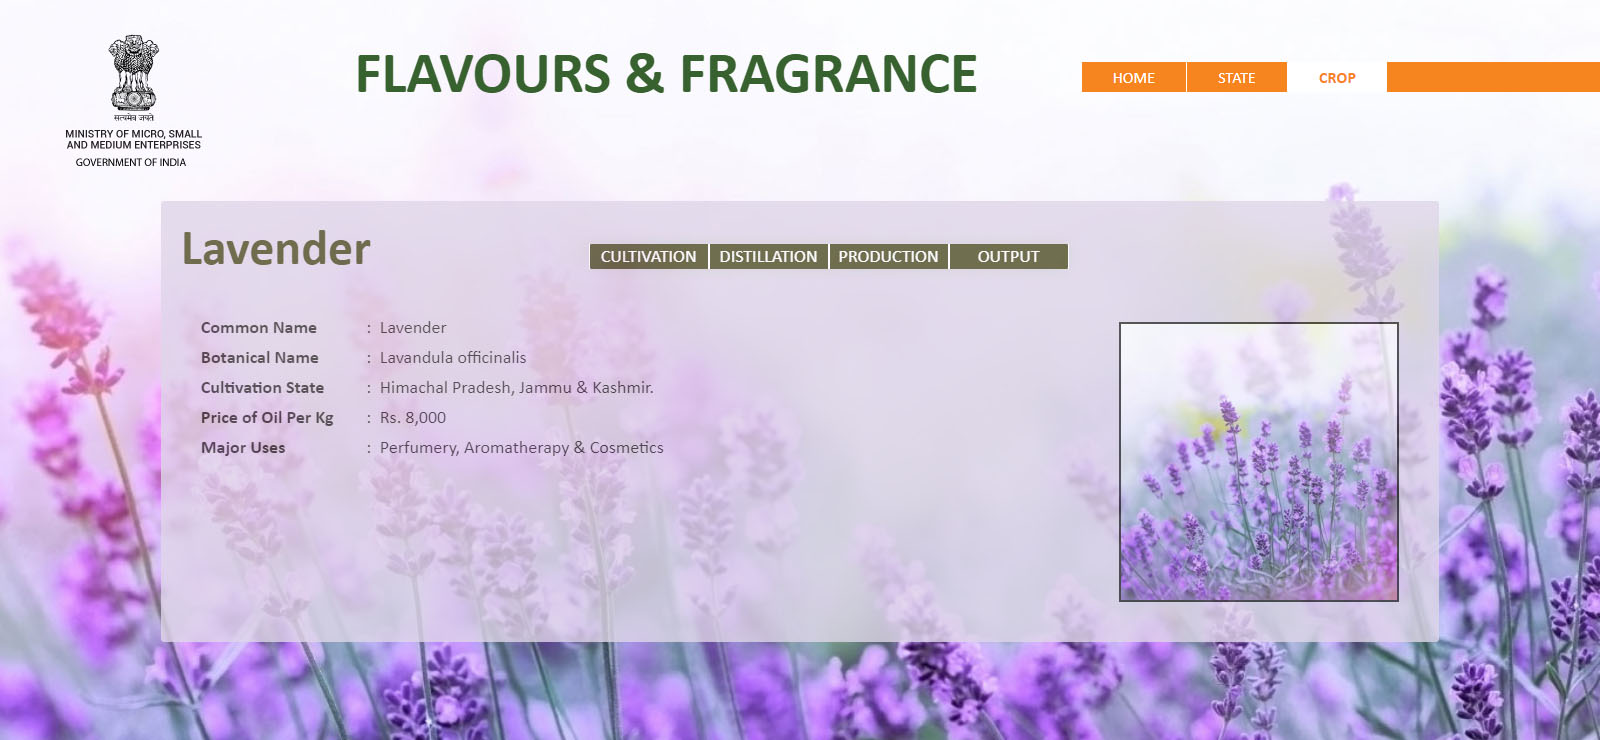 flavours-and-fragrance-lavender